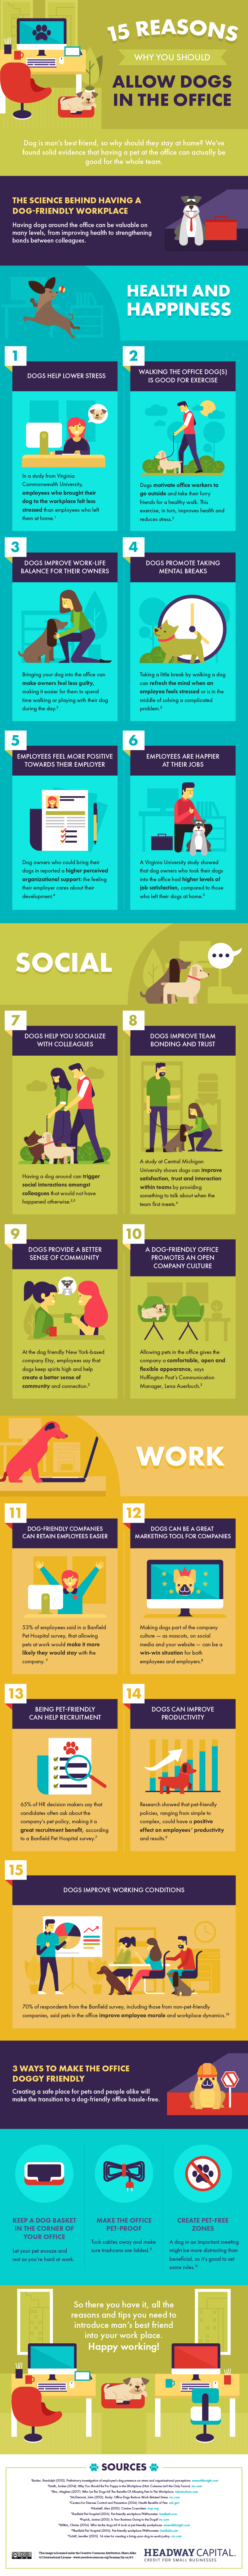 DESIGN-15-Reasons-Why-You-Should-Allow-Dogs-in-the-Office (1)